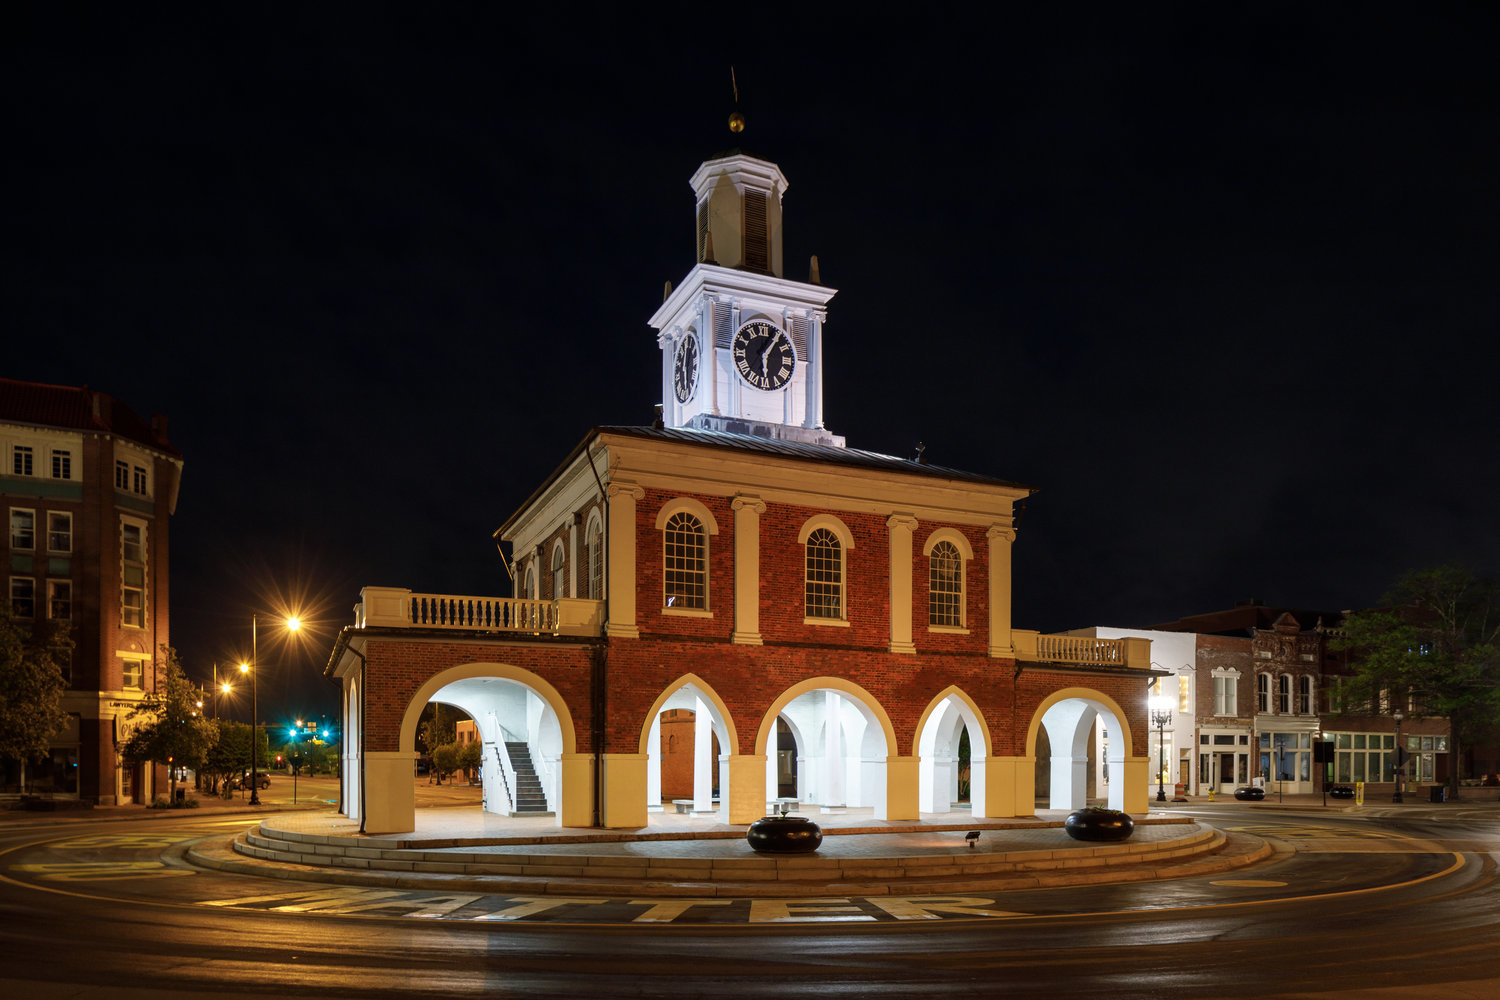 The City Council on Monday is expected to hear an update on repurposing the Market House.